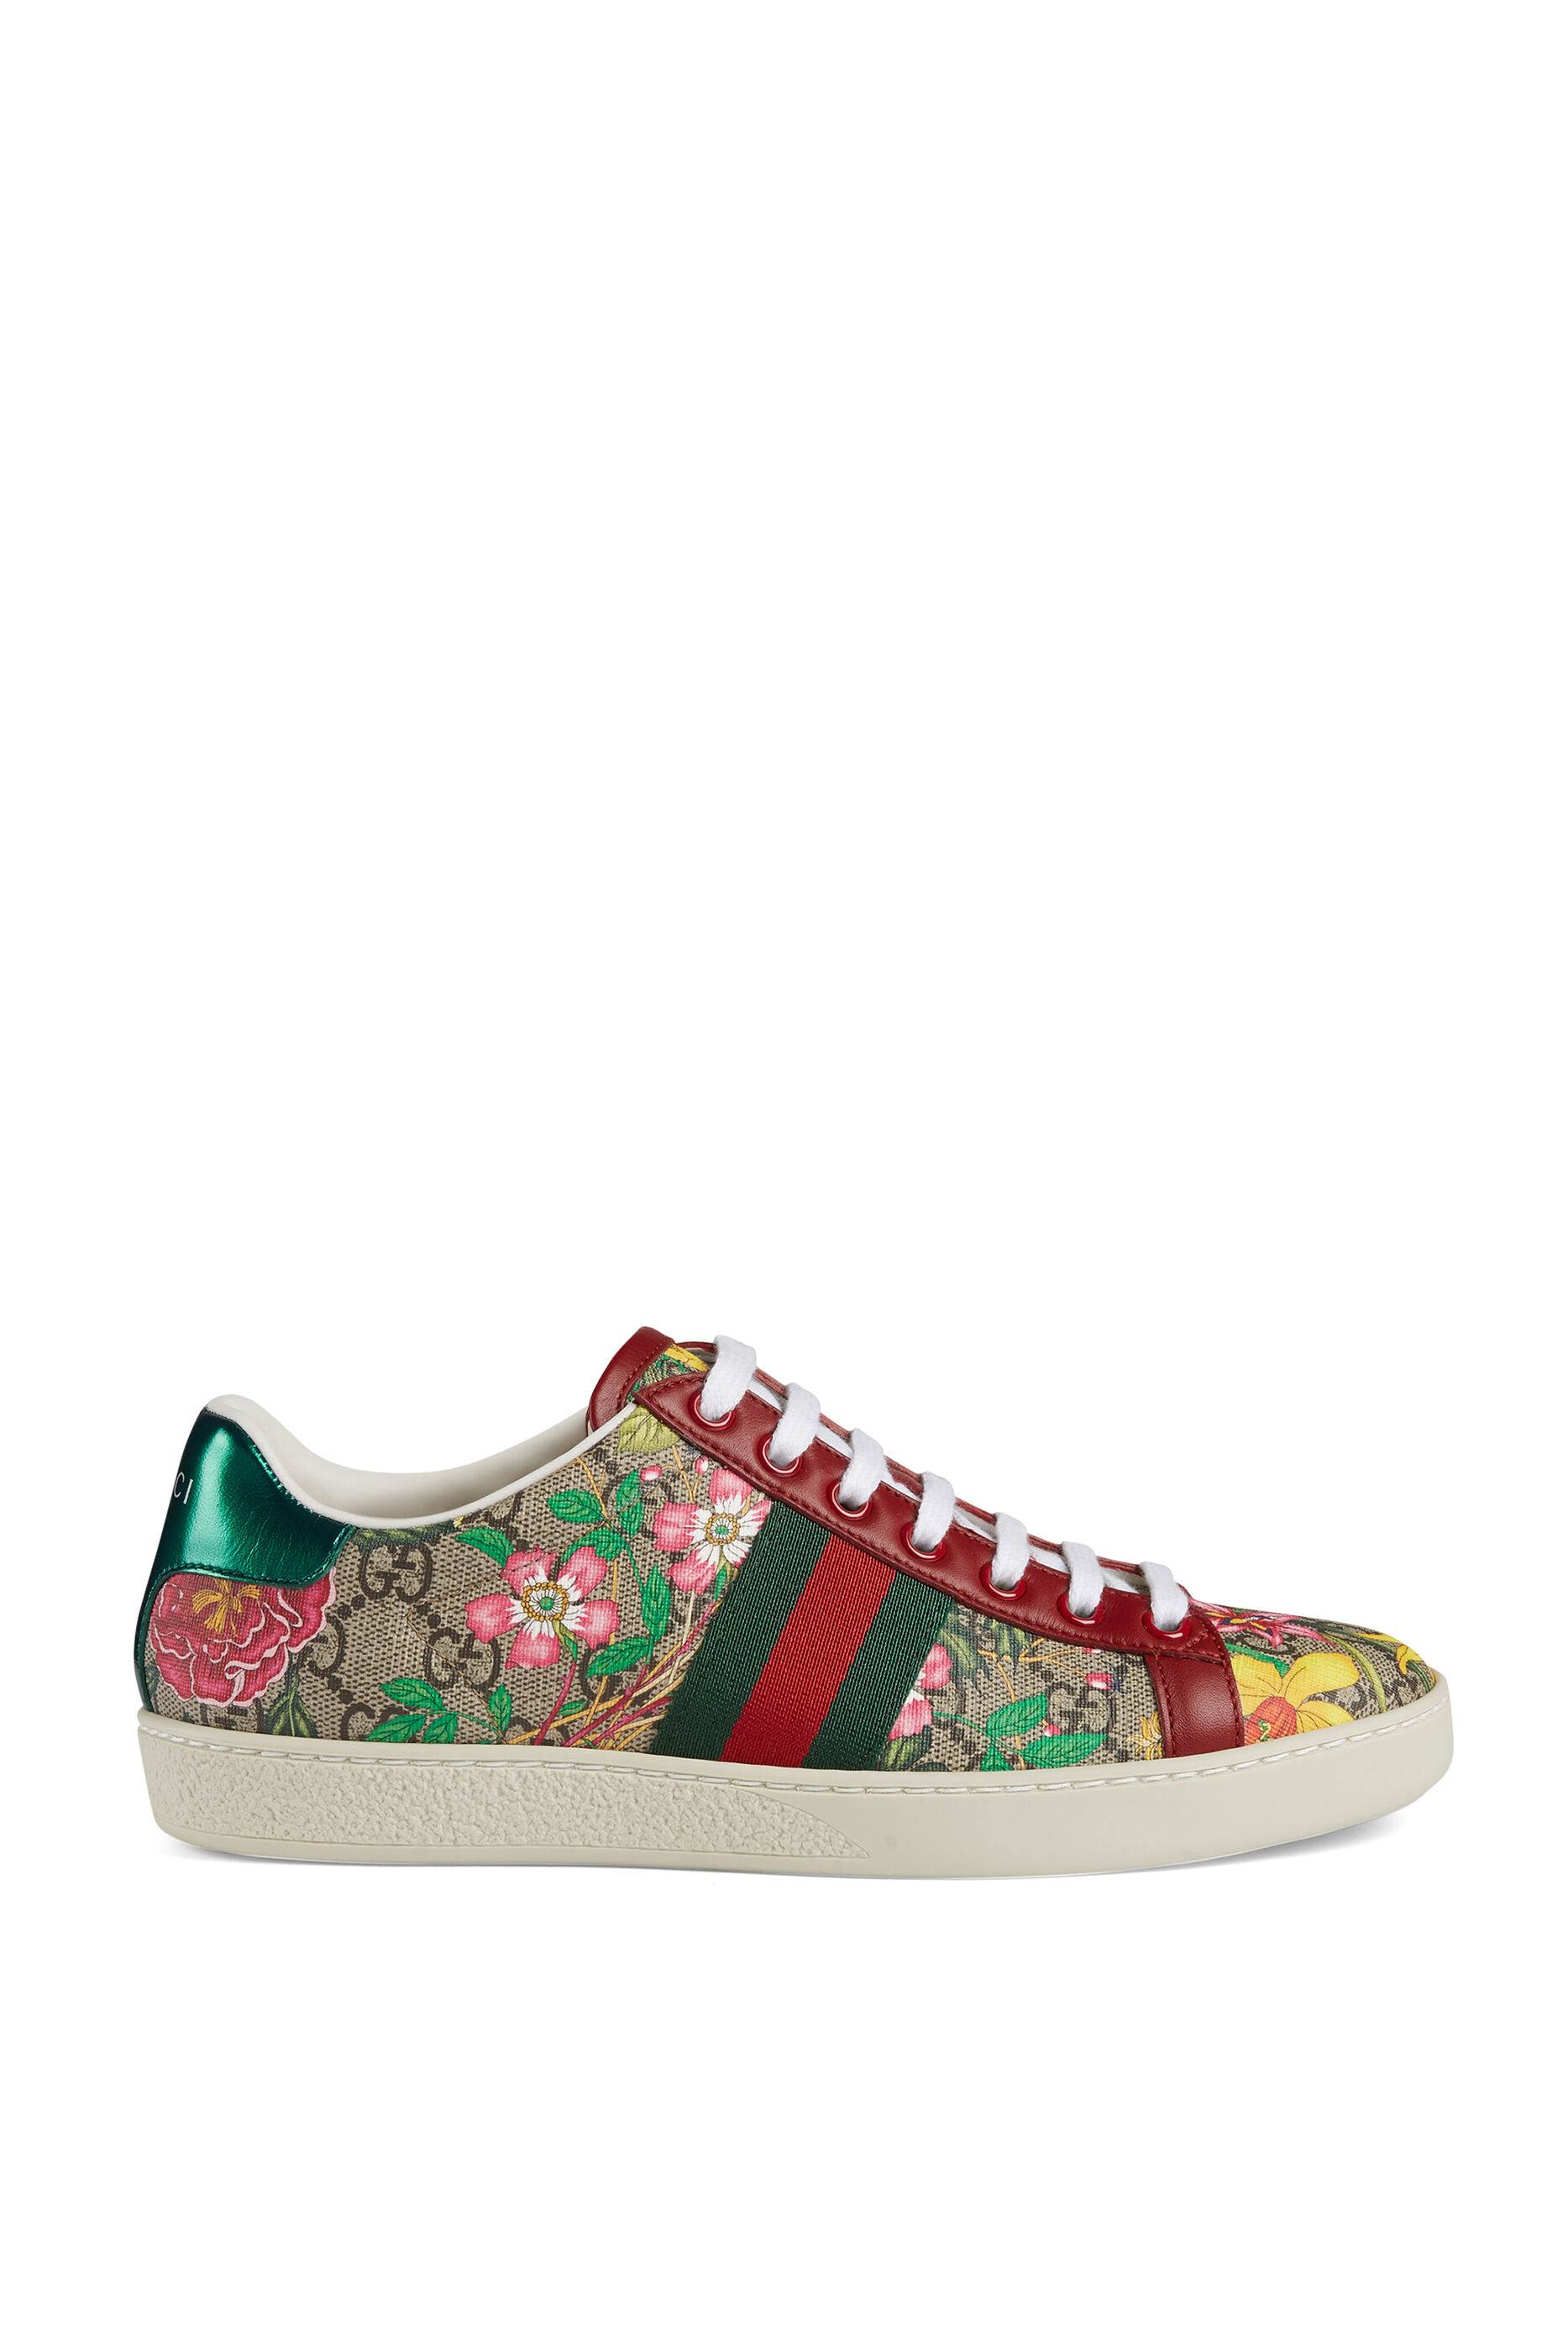 gucci floral slip on sneakers